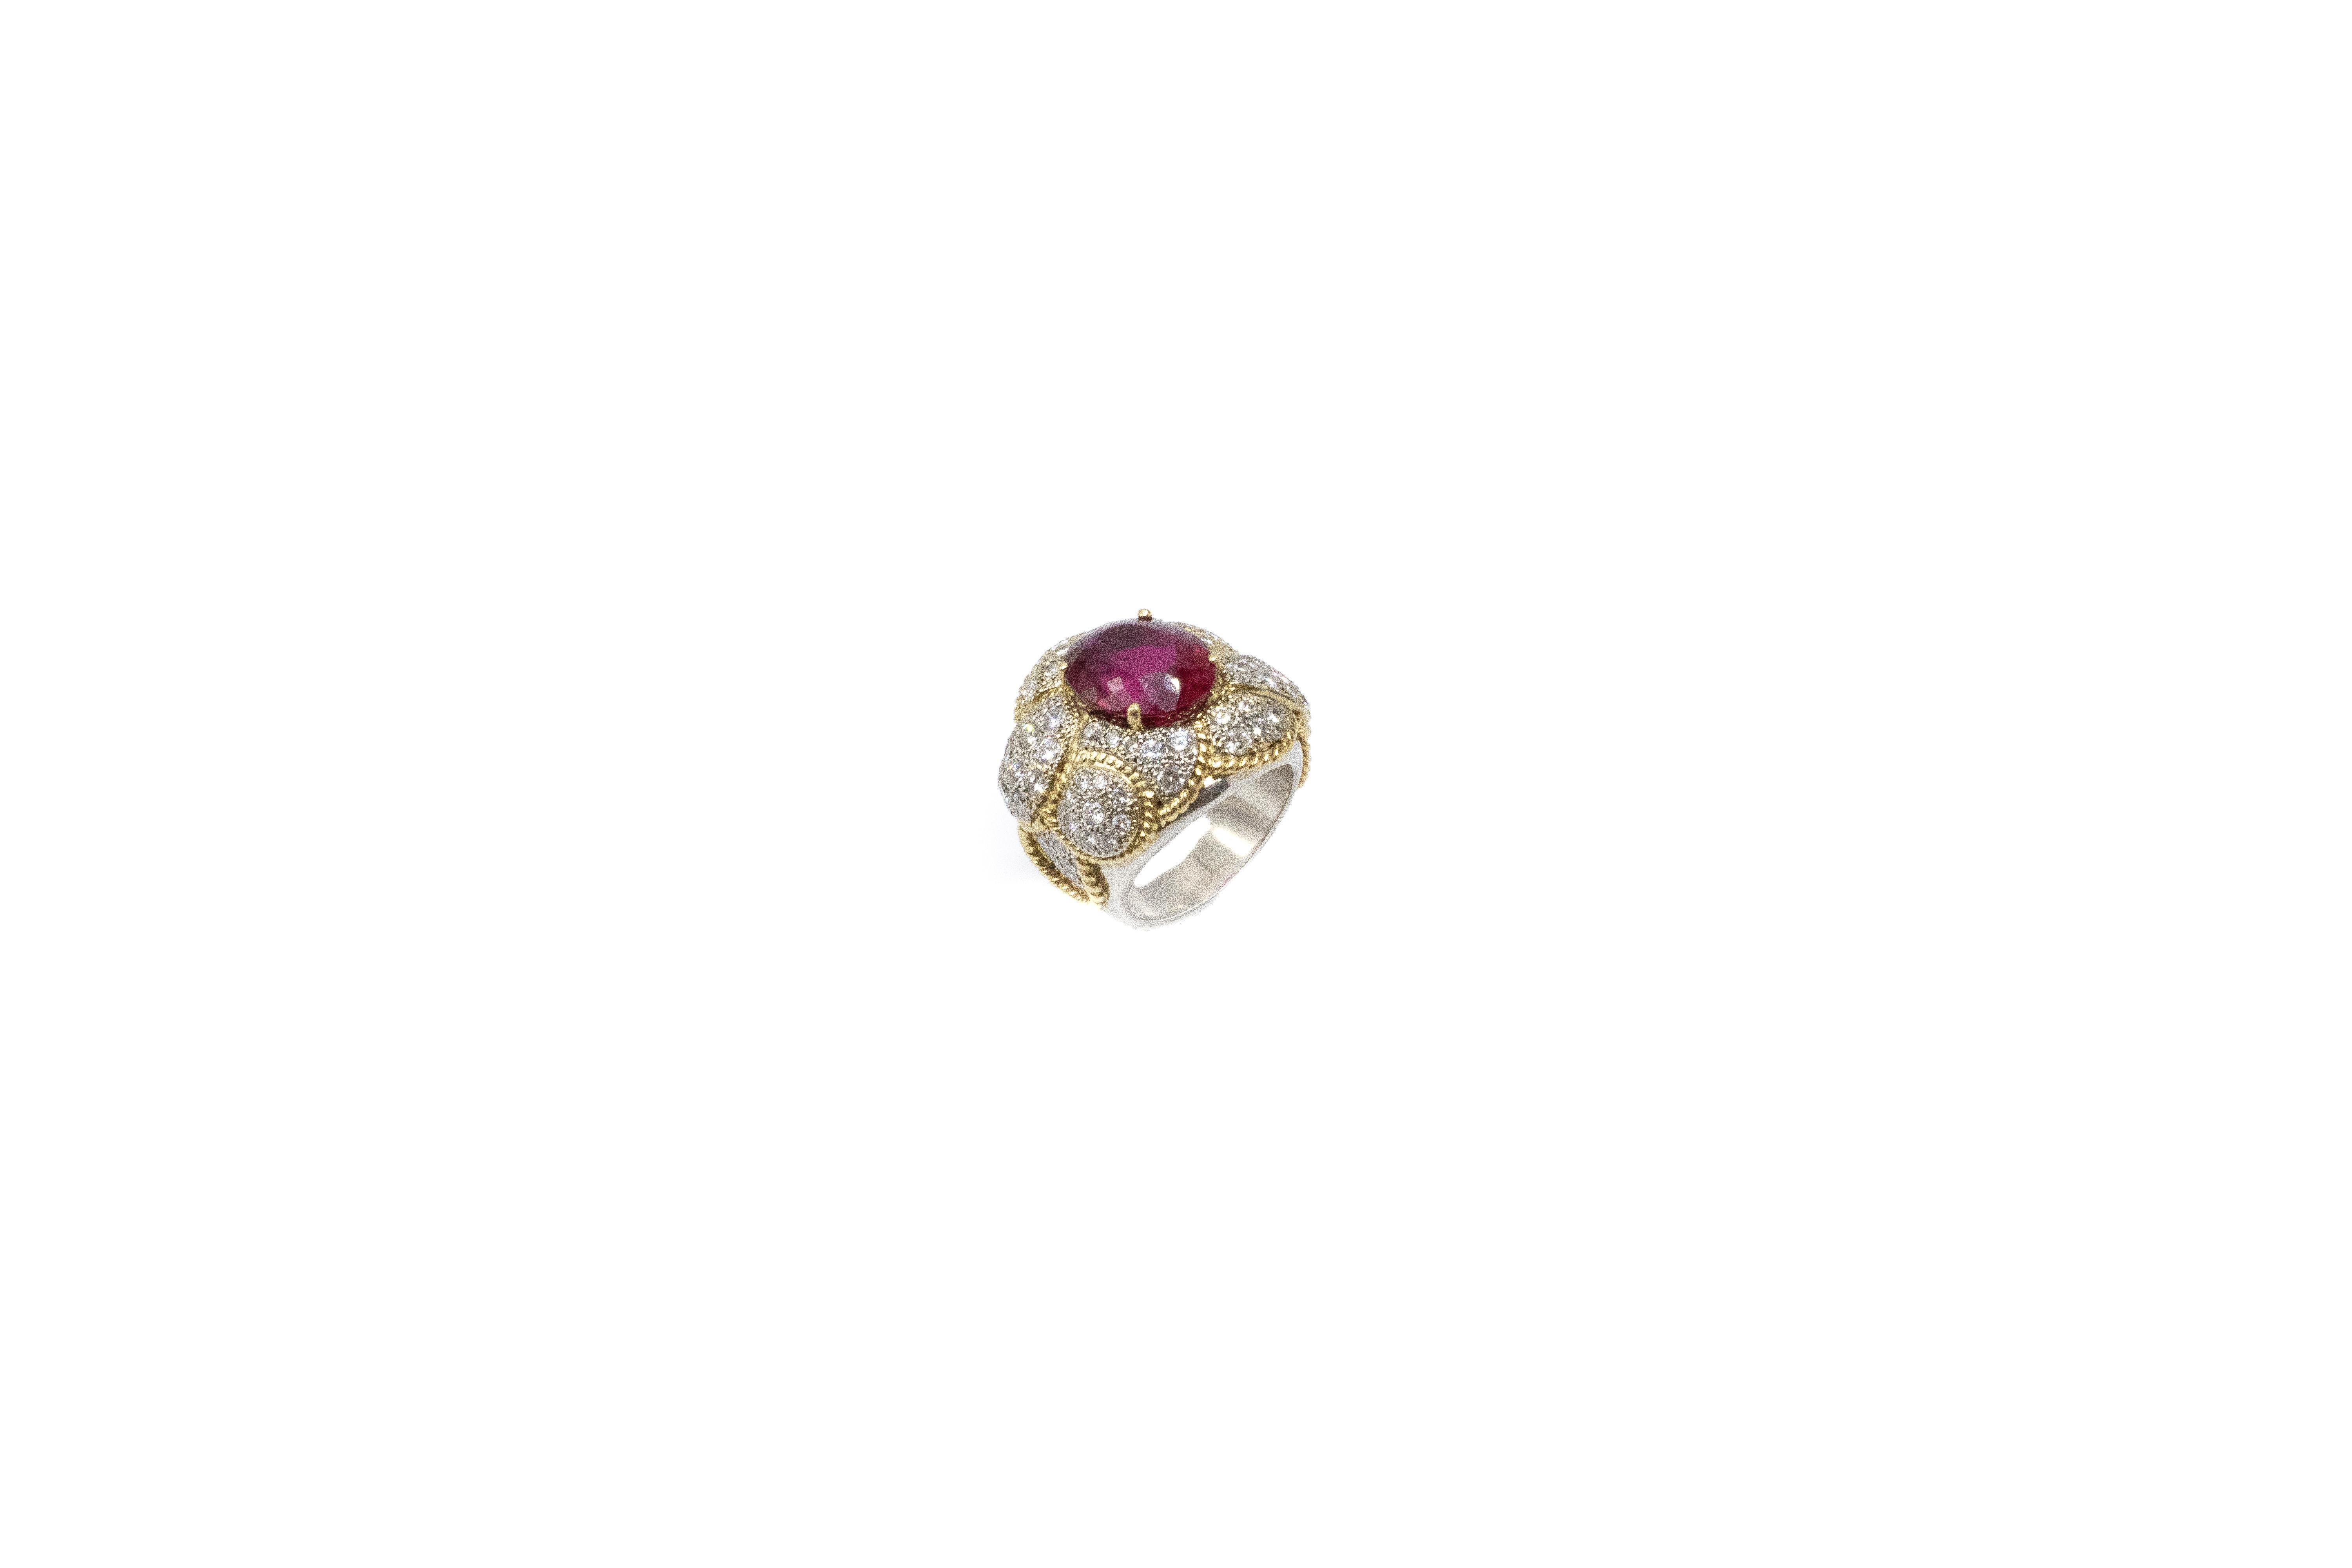 Large Rubellite Diamond Two Tone Gold Ring, Beautiful rubellite tourmaline is surrounded by round cut diamonds in a one of a kind two tone gold and platinum setting. sz 8.5